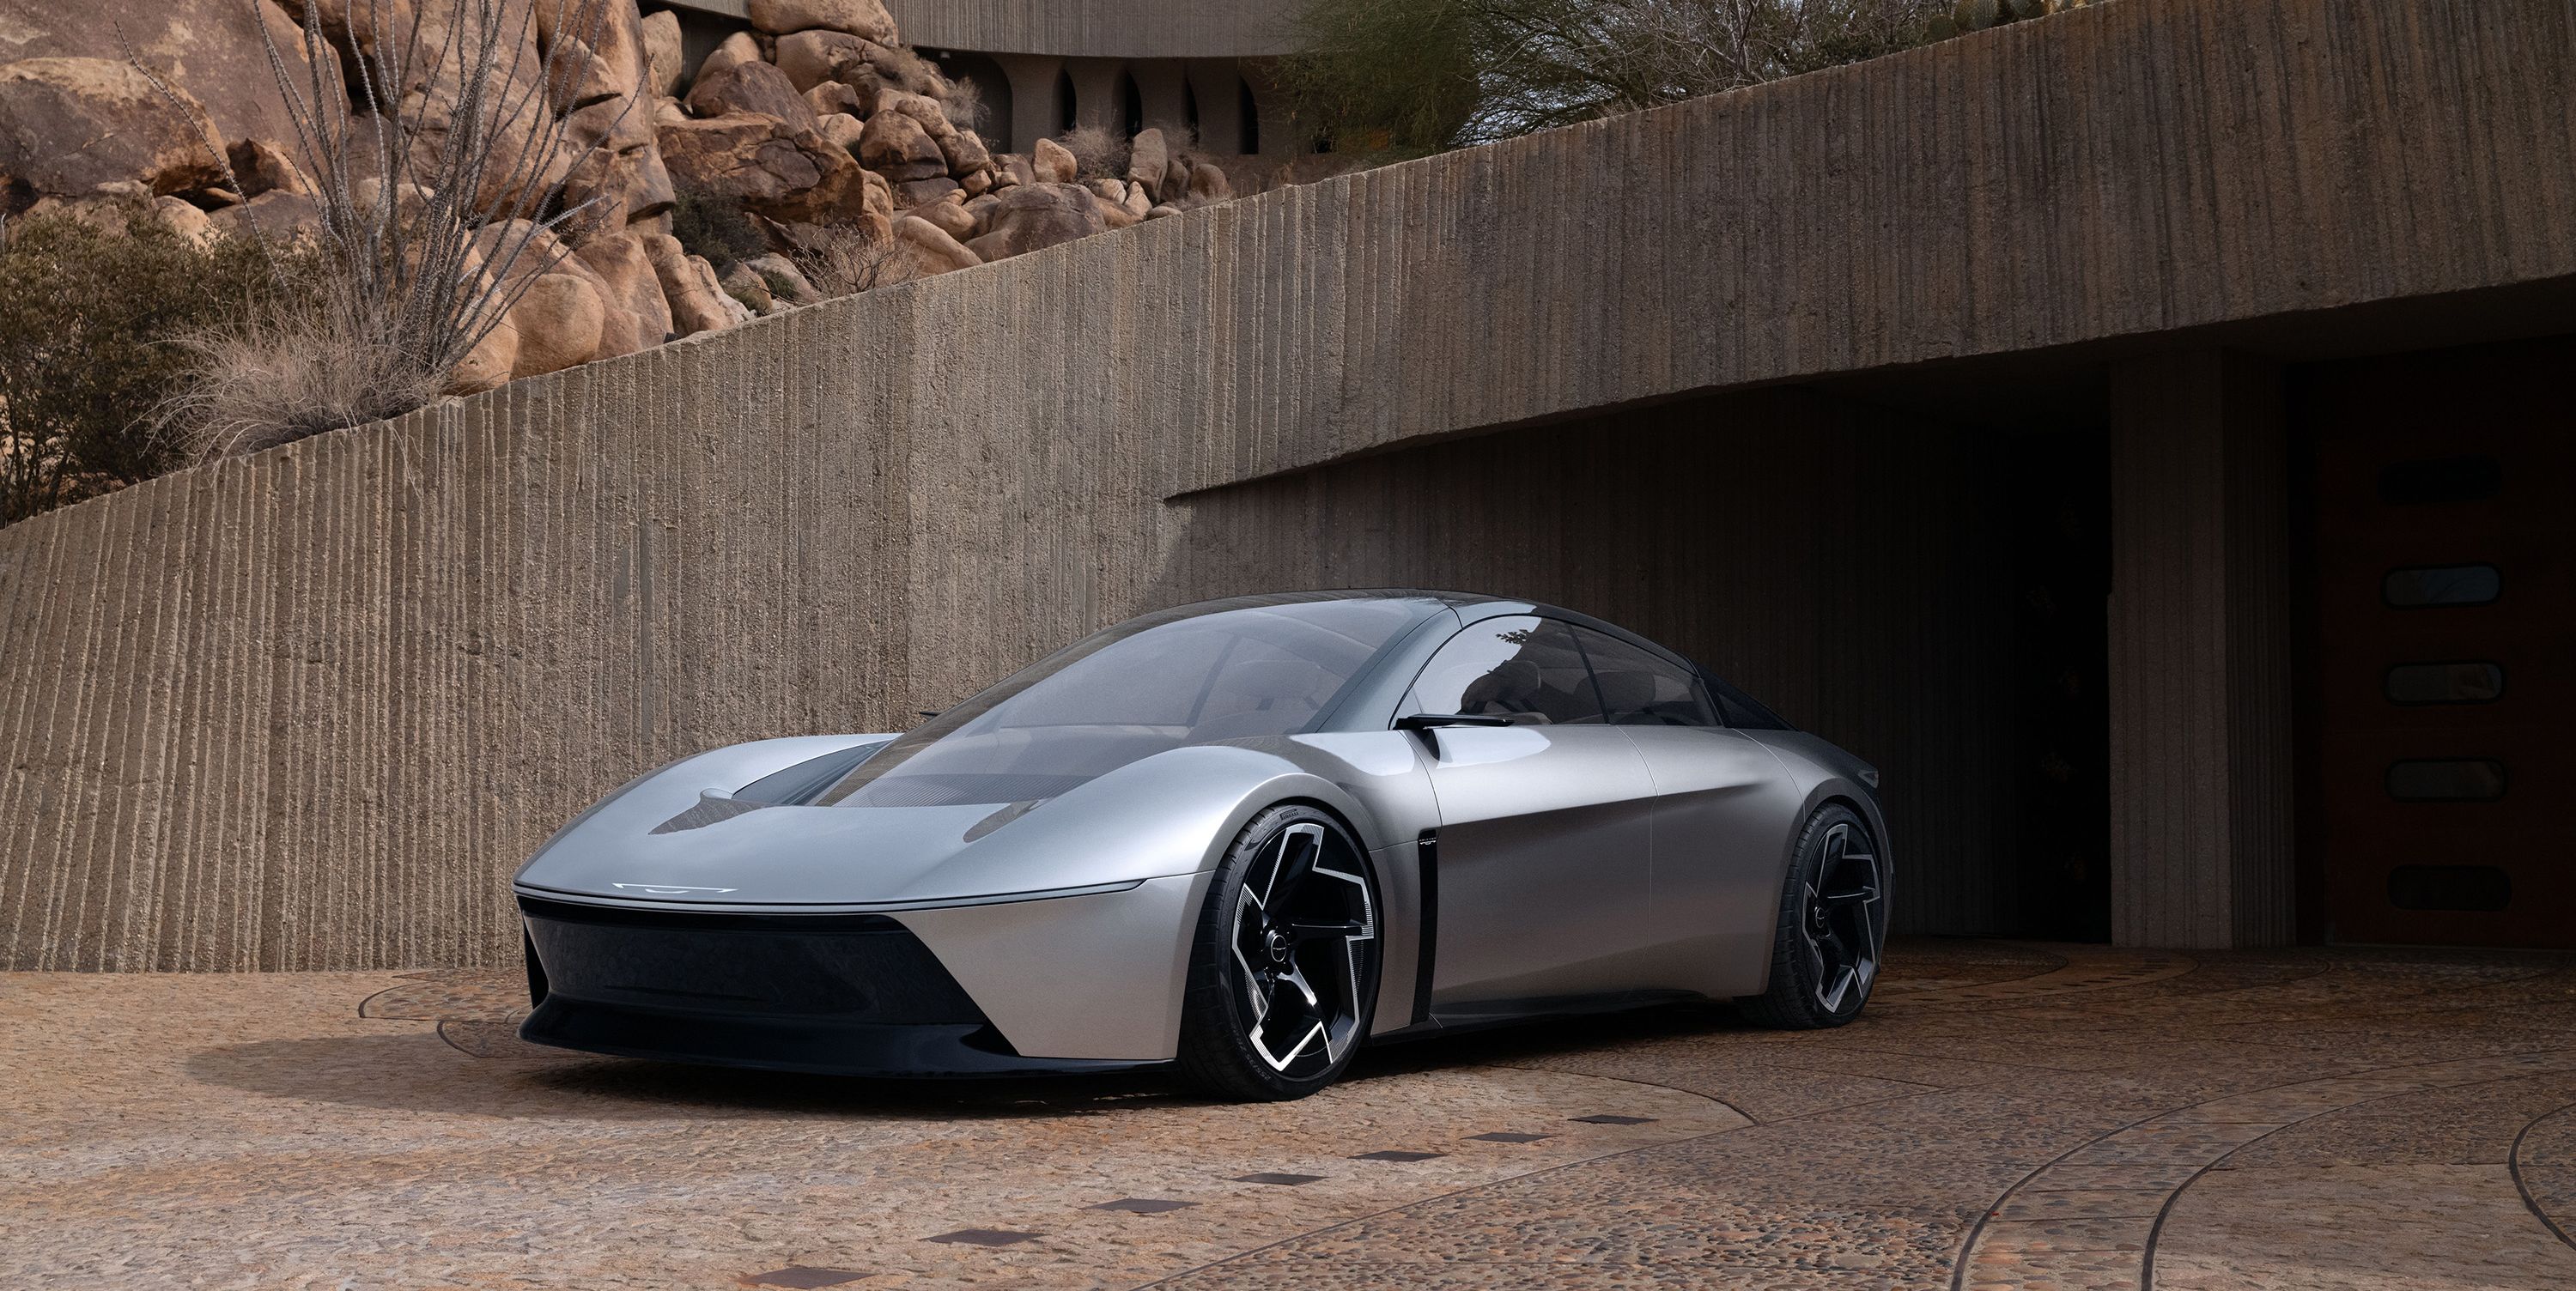 The Halcyon Concept Sets the Vibe for Chrysler's Future